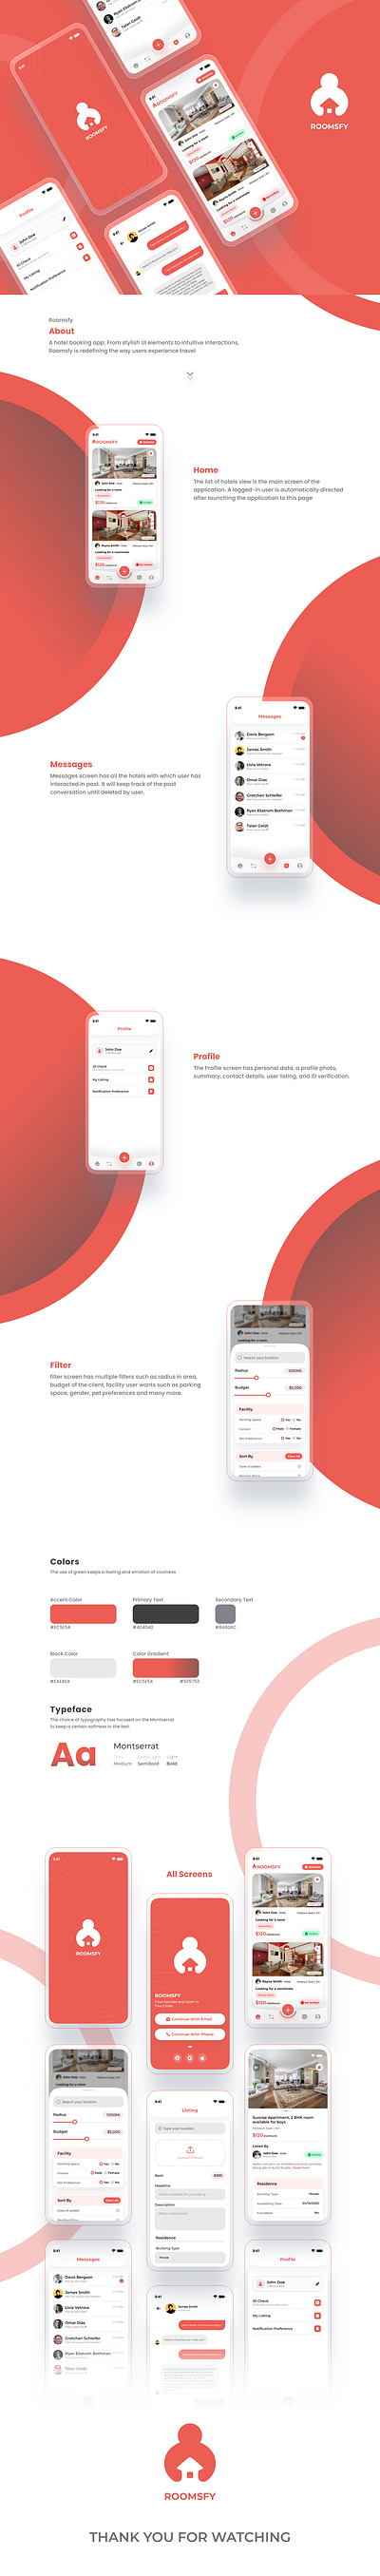 ROOMSFY - Hotel Booking Design hotel booking design mobile app ui mobile ui room booking ui ui uiux